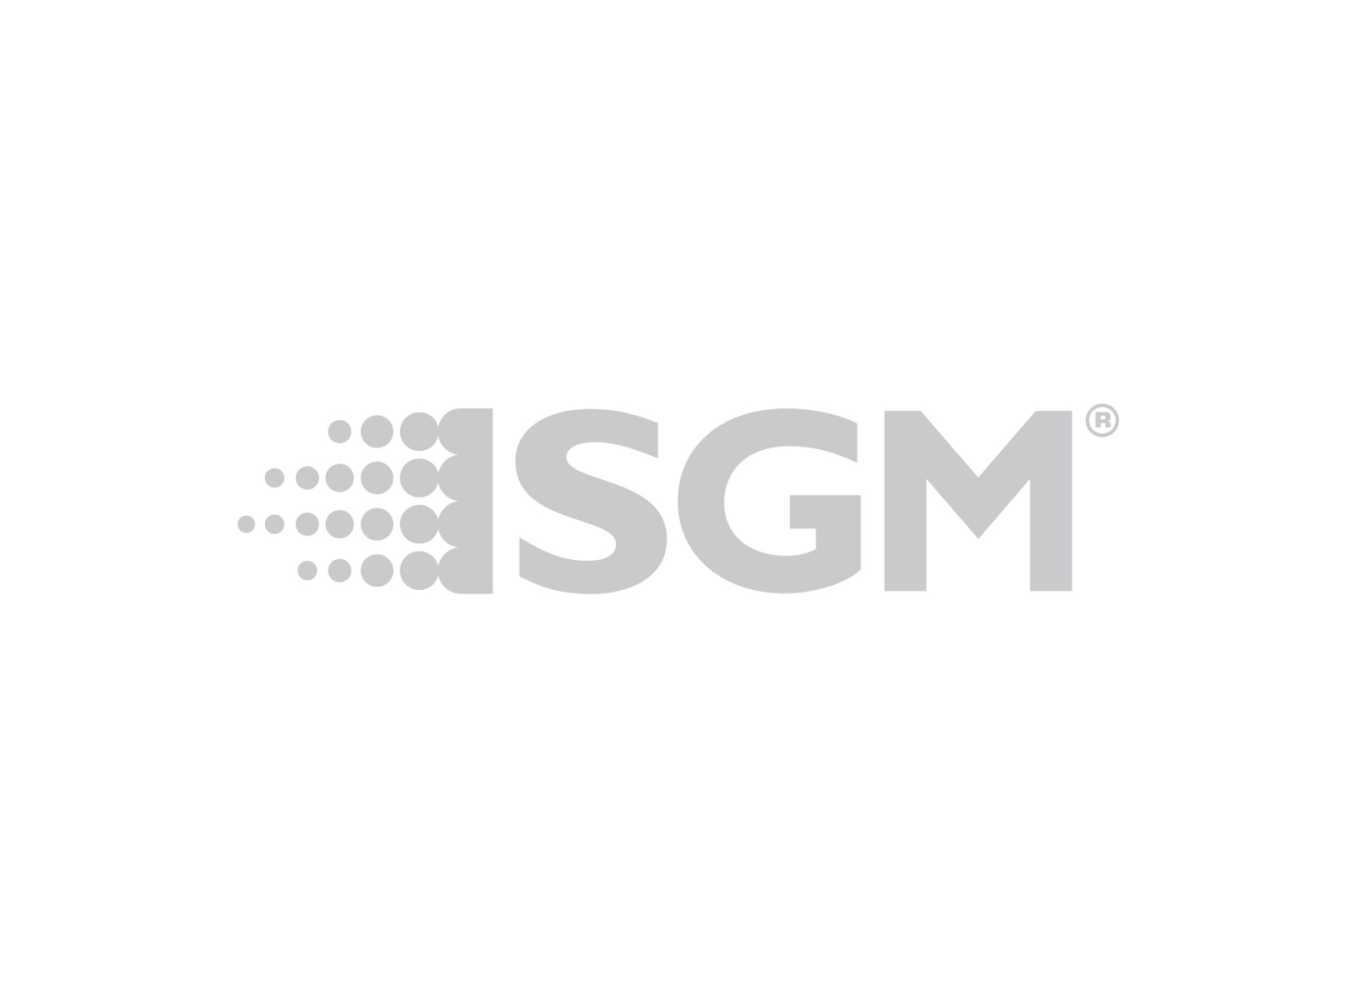 In Germany, SGM Light now has a direct to market setup